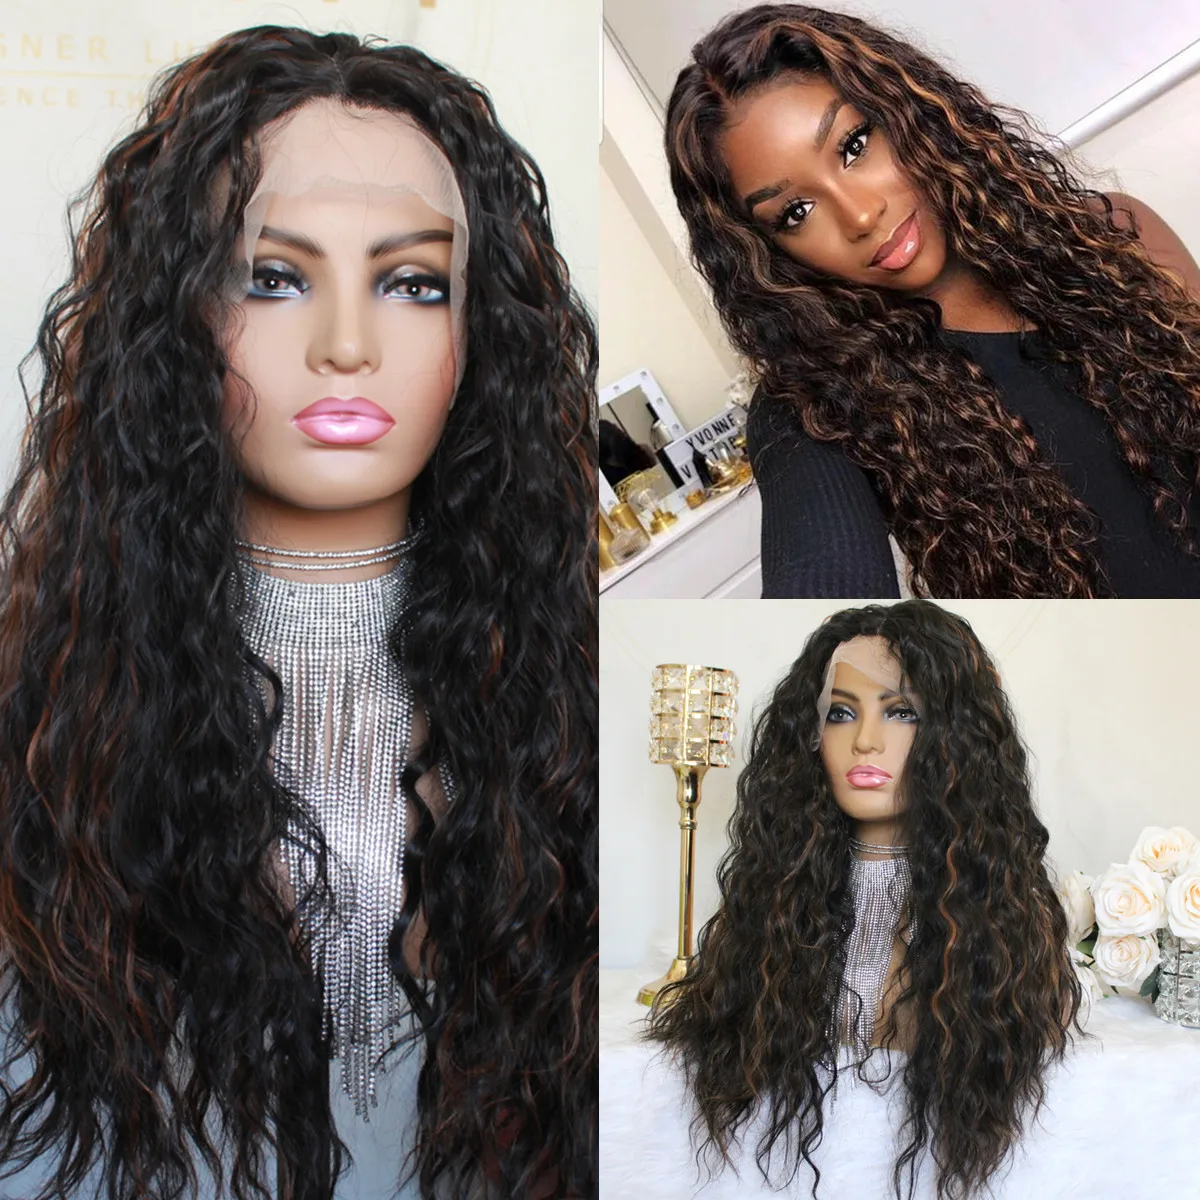 deep-wave-lace-front-wigs-22-highlight-blonde-curly-hair-for-women-synthetic-wig-middle-part-lace-wigs